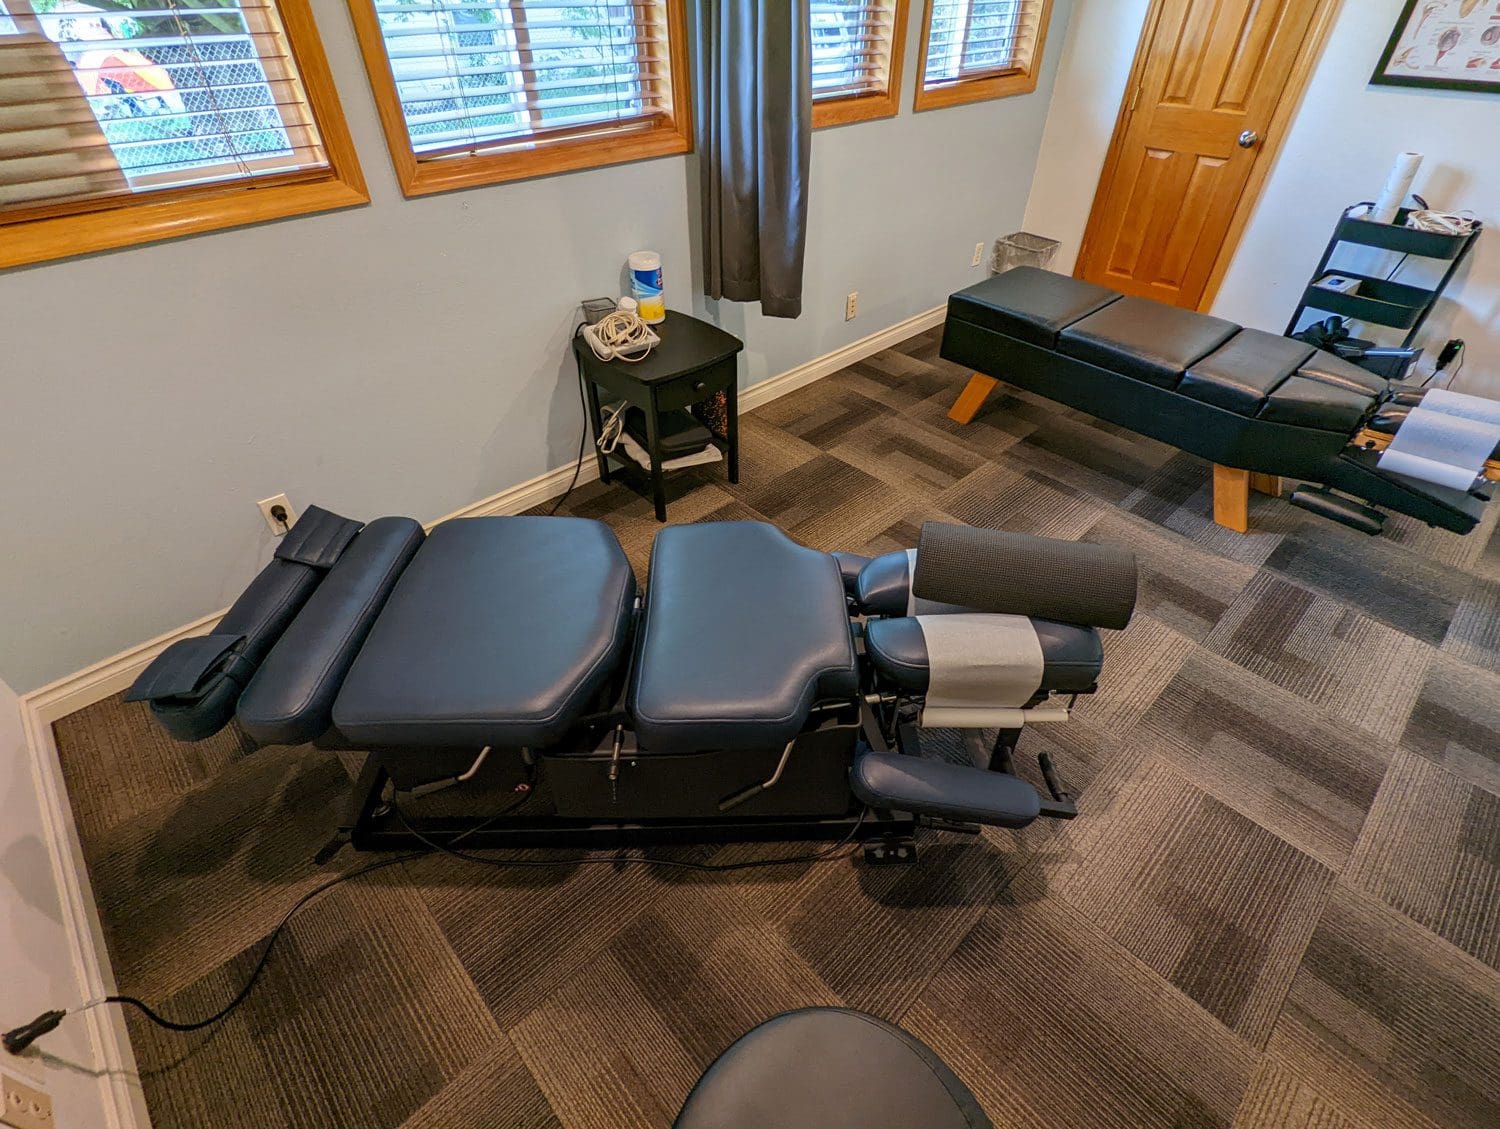 Hillsboro Accident Care Chiropractic & Massage treatment room with adjustment table.